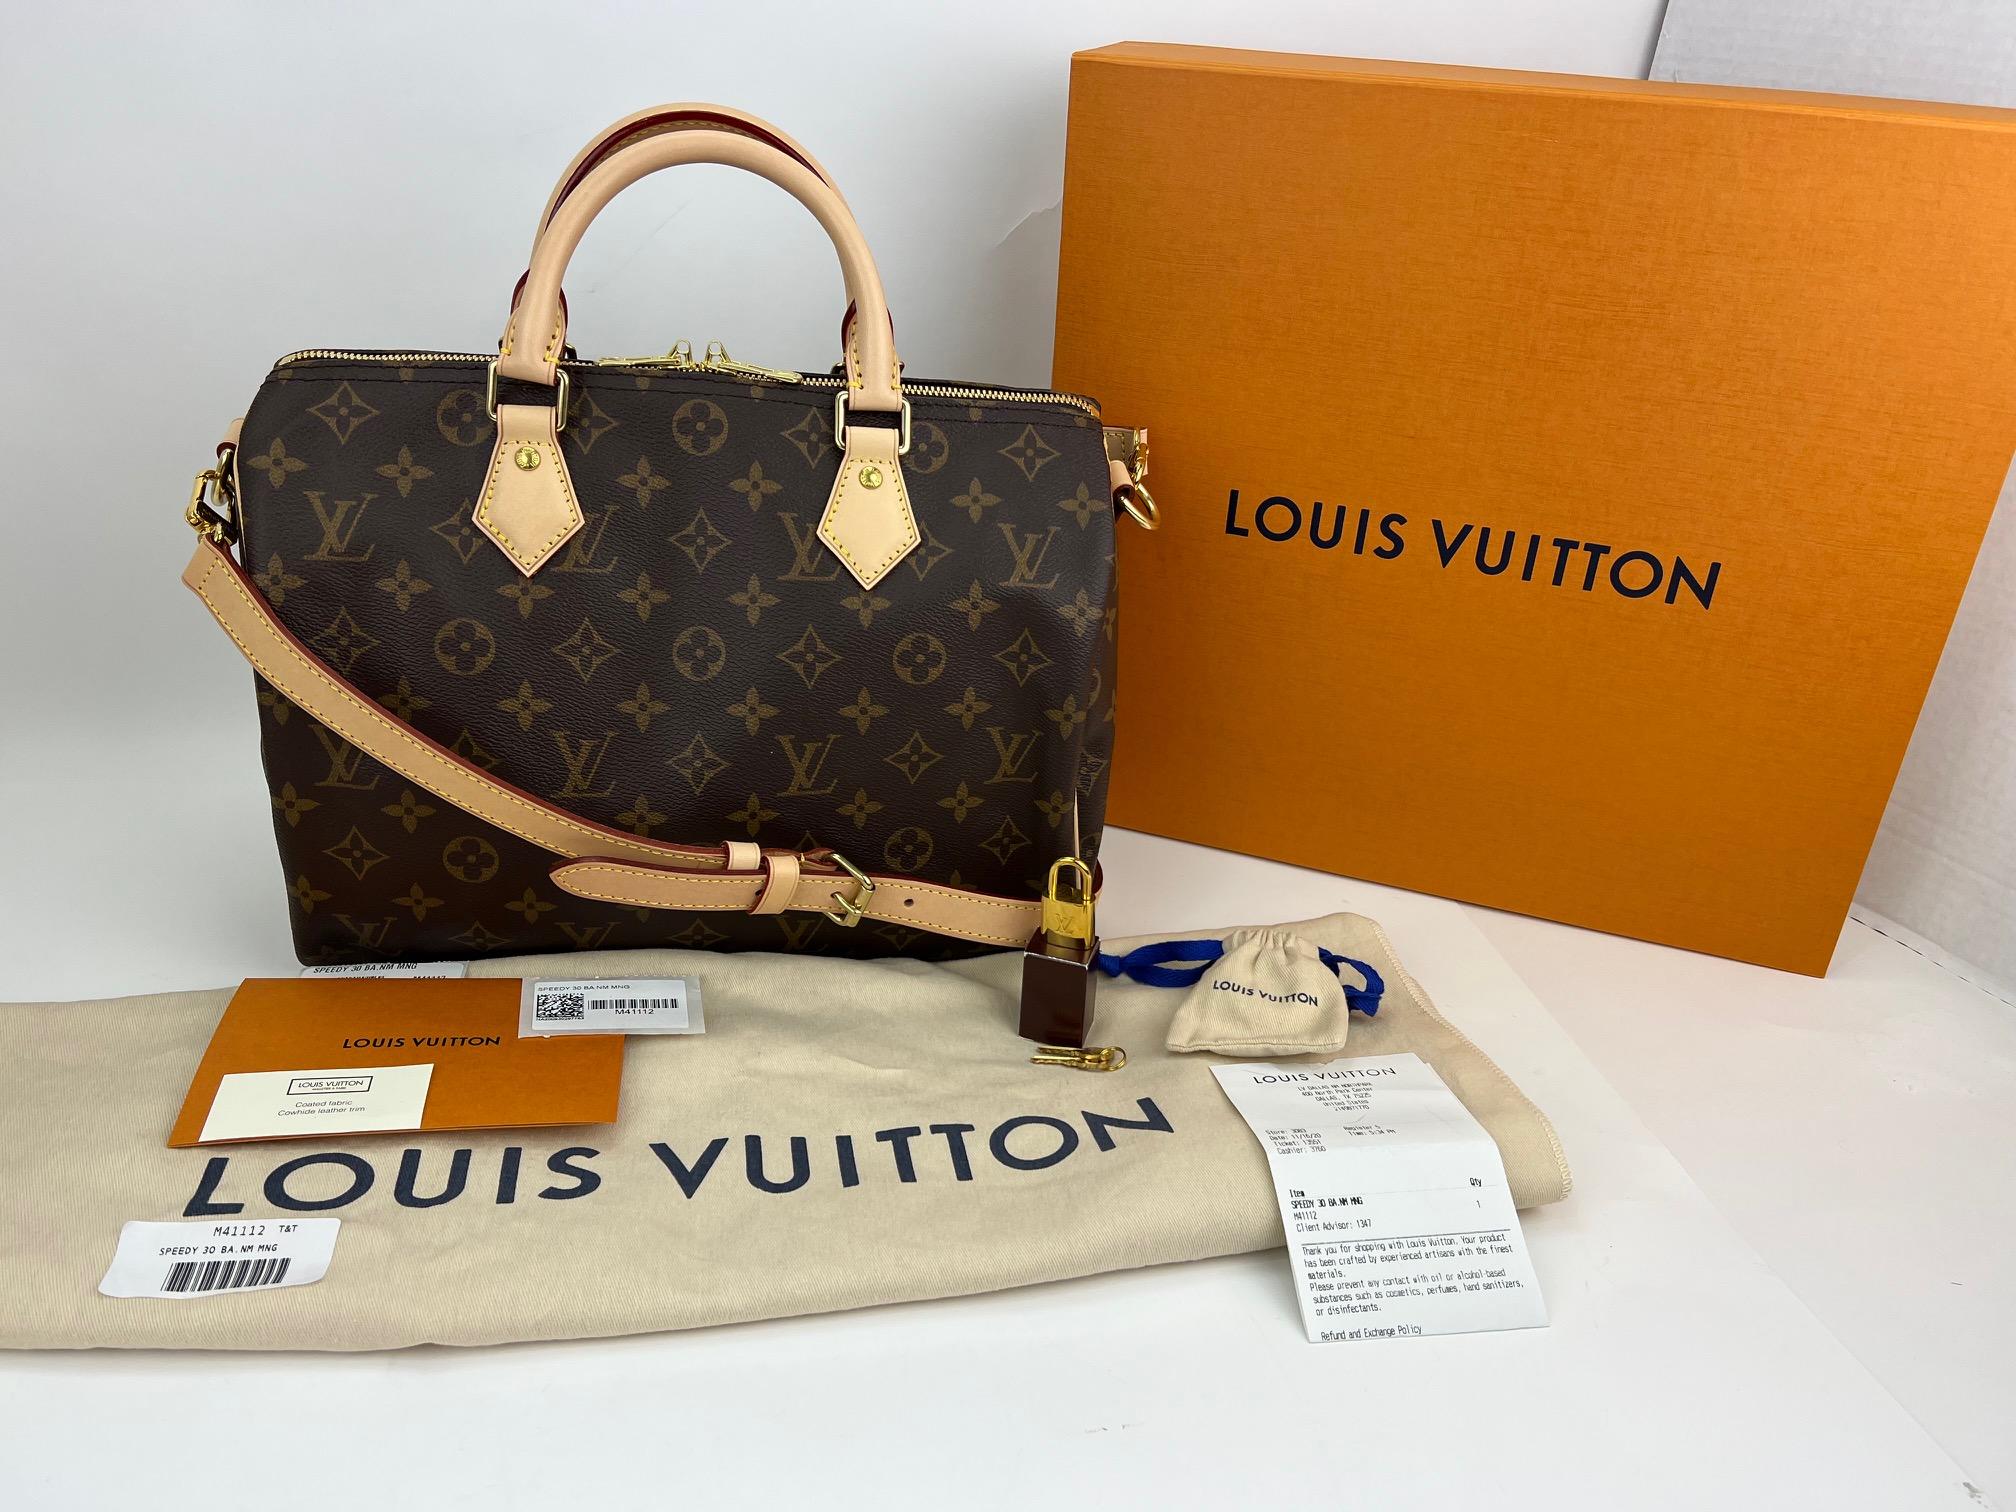 New 100% Authentic
  Louis Vuitton Speedy Bandouliere 30 Monogram
W/added insert to help keep its shape and organize
 RATING: New , Not used
MATERIAL: monogram canvas, leather trim
HANDLE: double leather
DROP: 3.5''
STRAP: LV Leather Removable